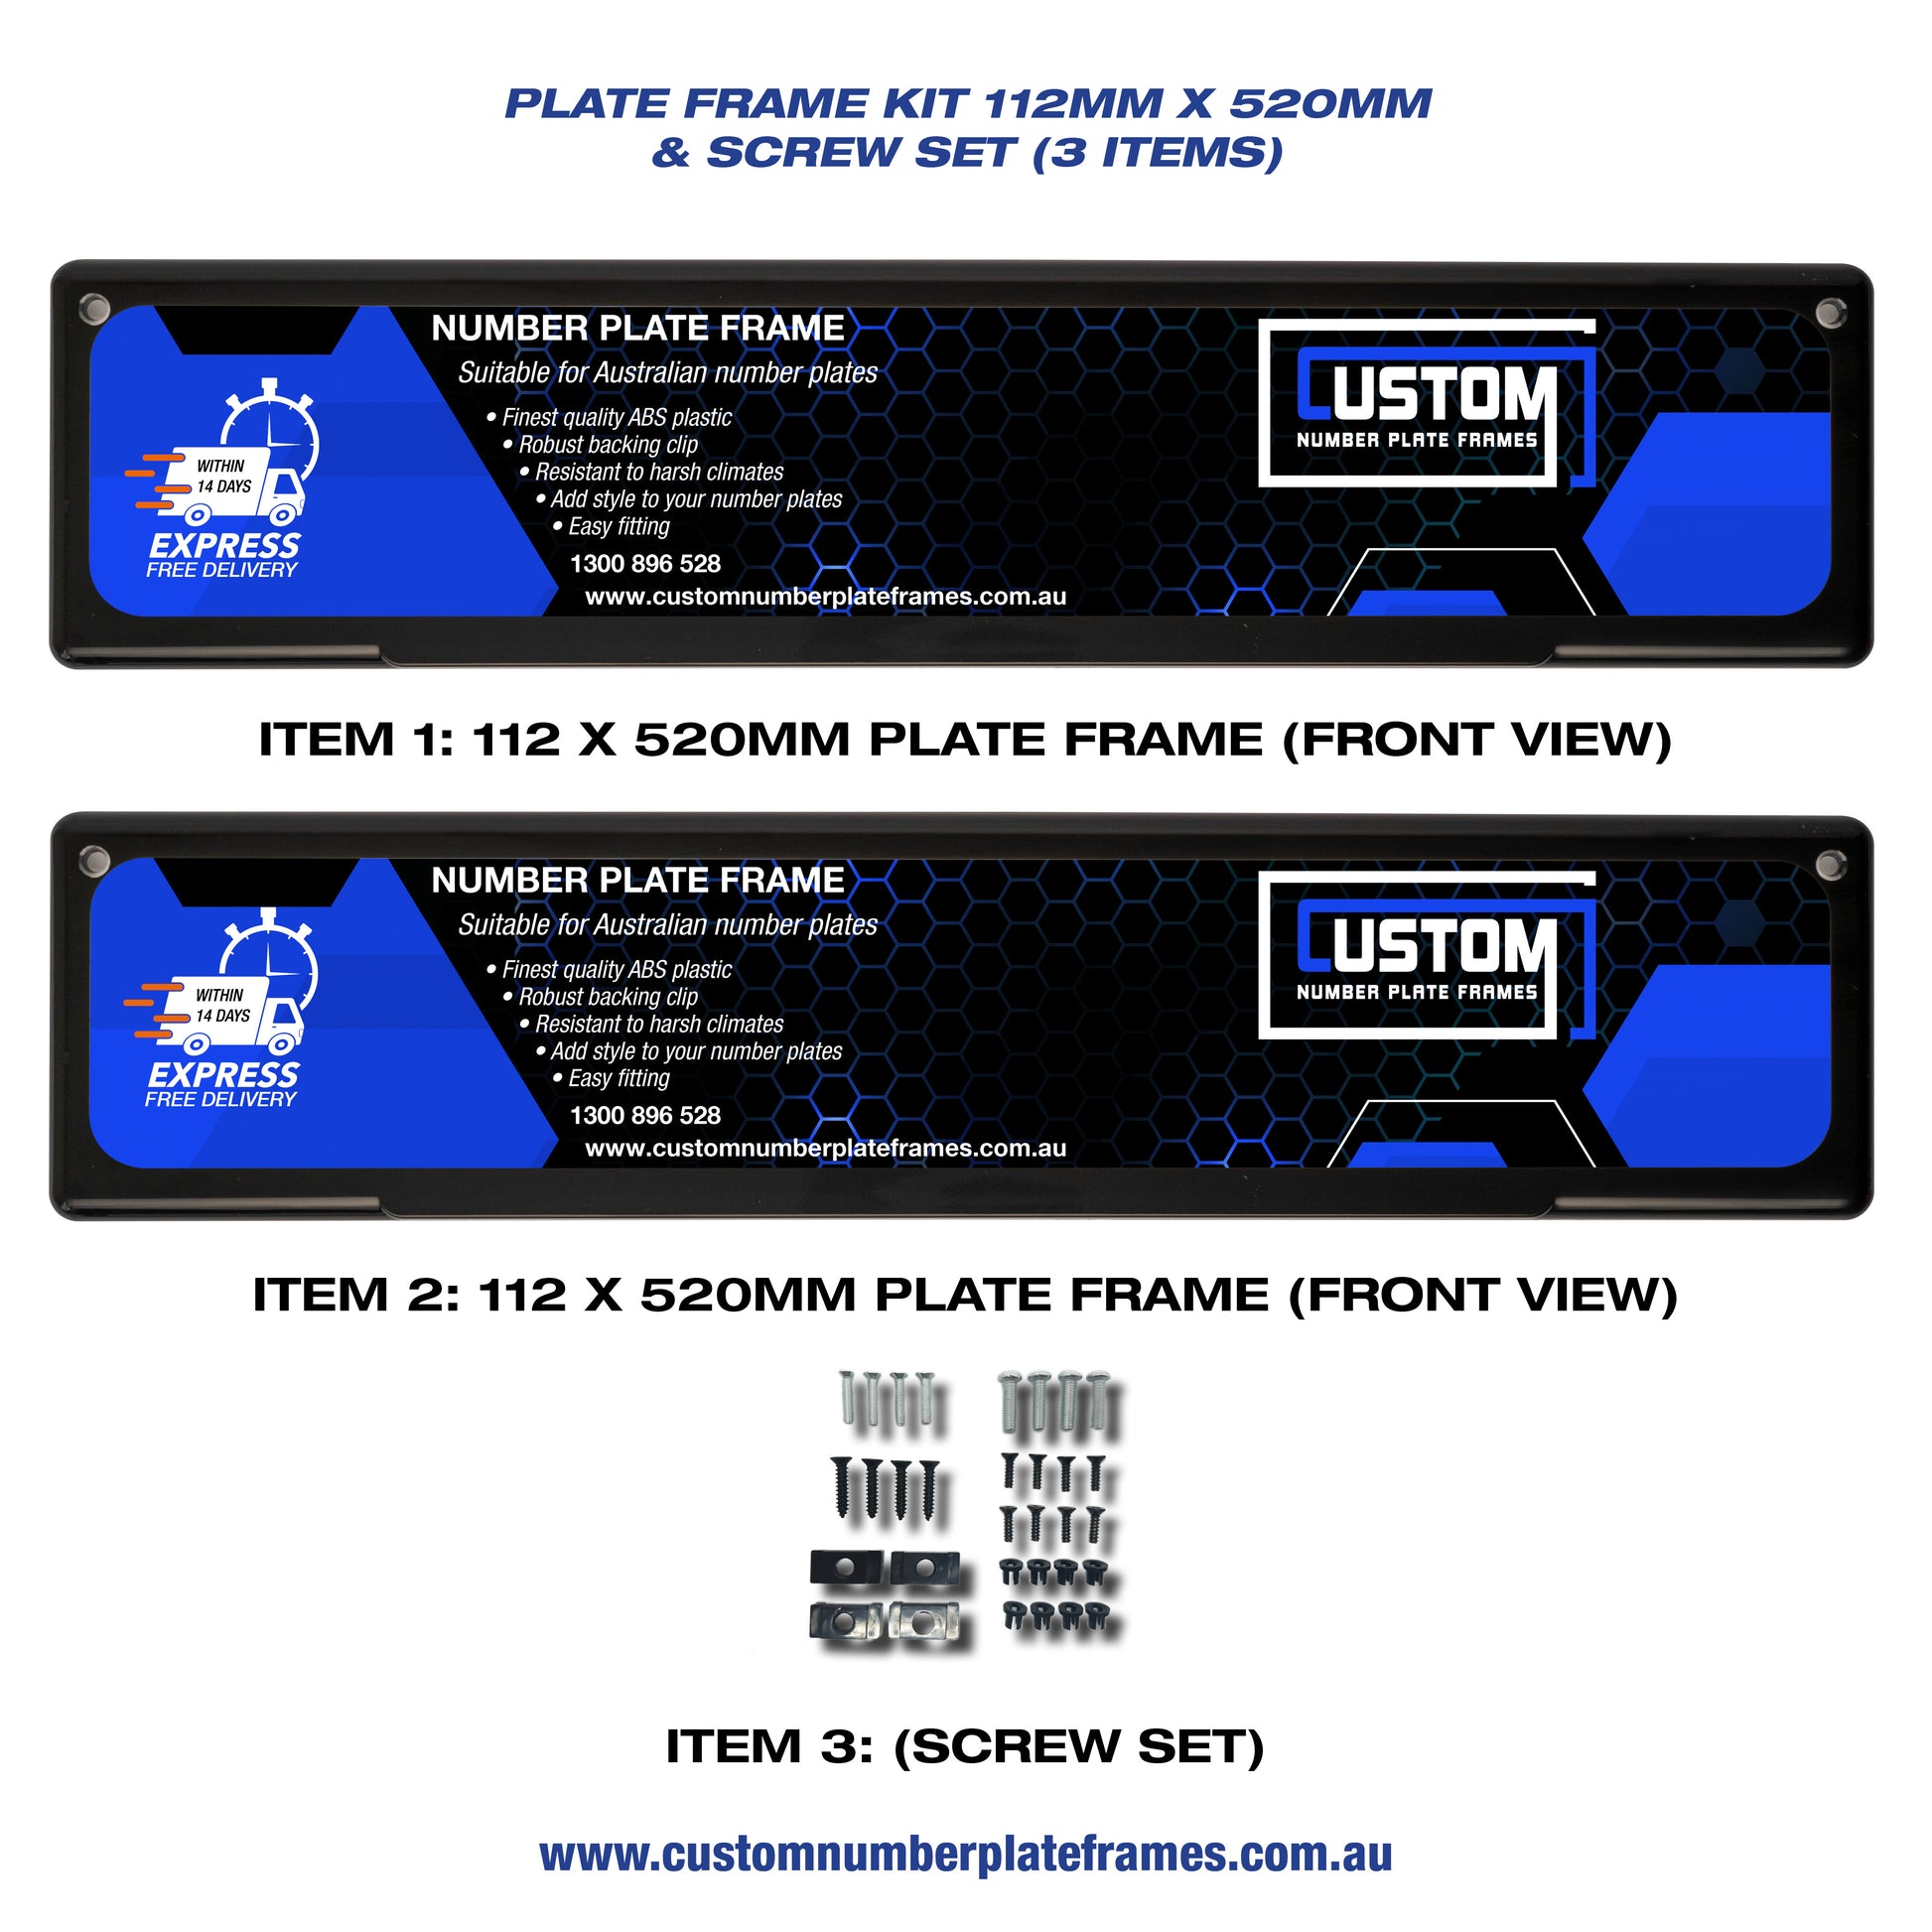 Plate Frame Kit 112mm x 520mm (Euro) Suitable for: NSW, VIC, QLD, SA, ACT, NT, WA. - CUSTOM NUMBER PLATE FRAMES